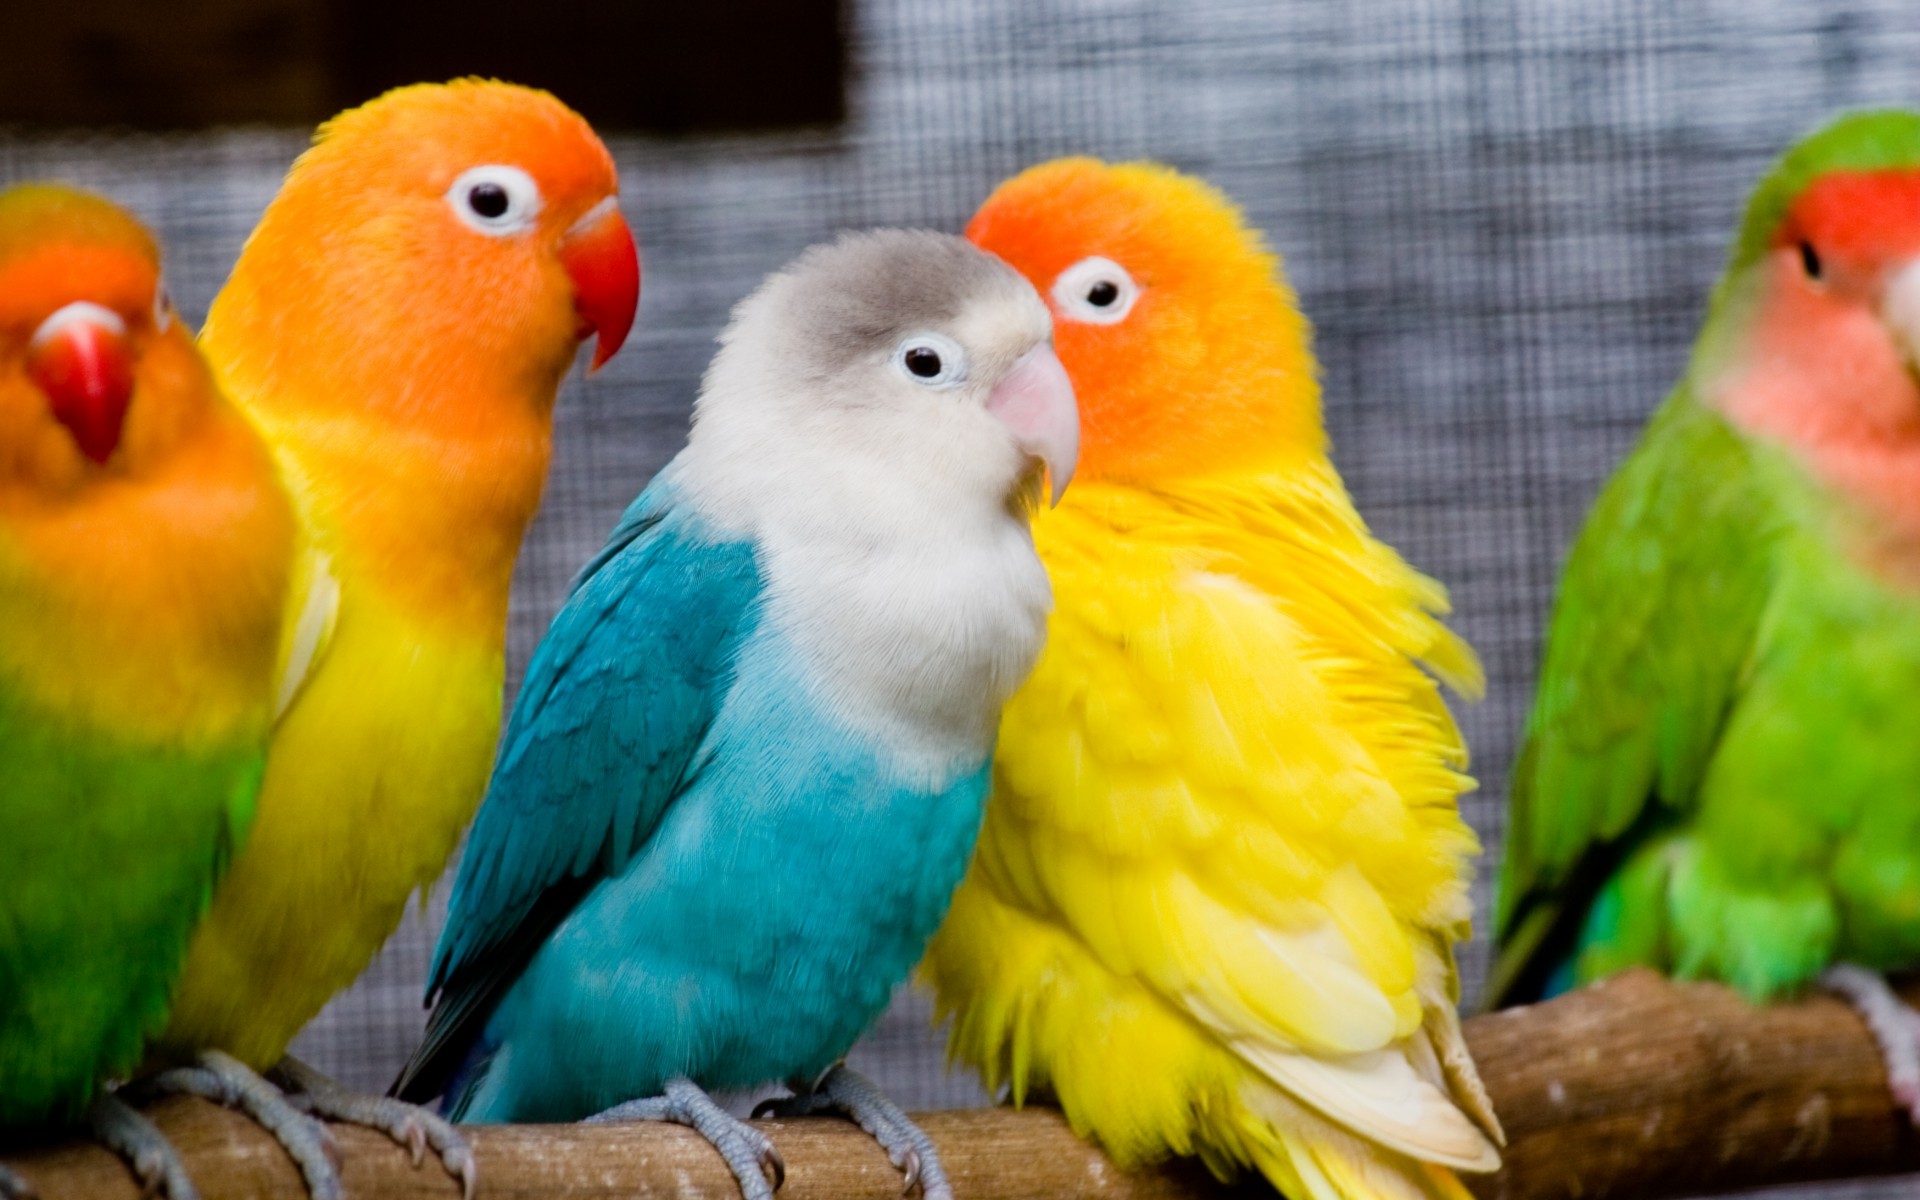 High Definition parrot wallpaper for free download